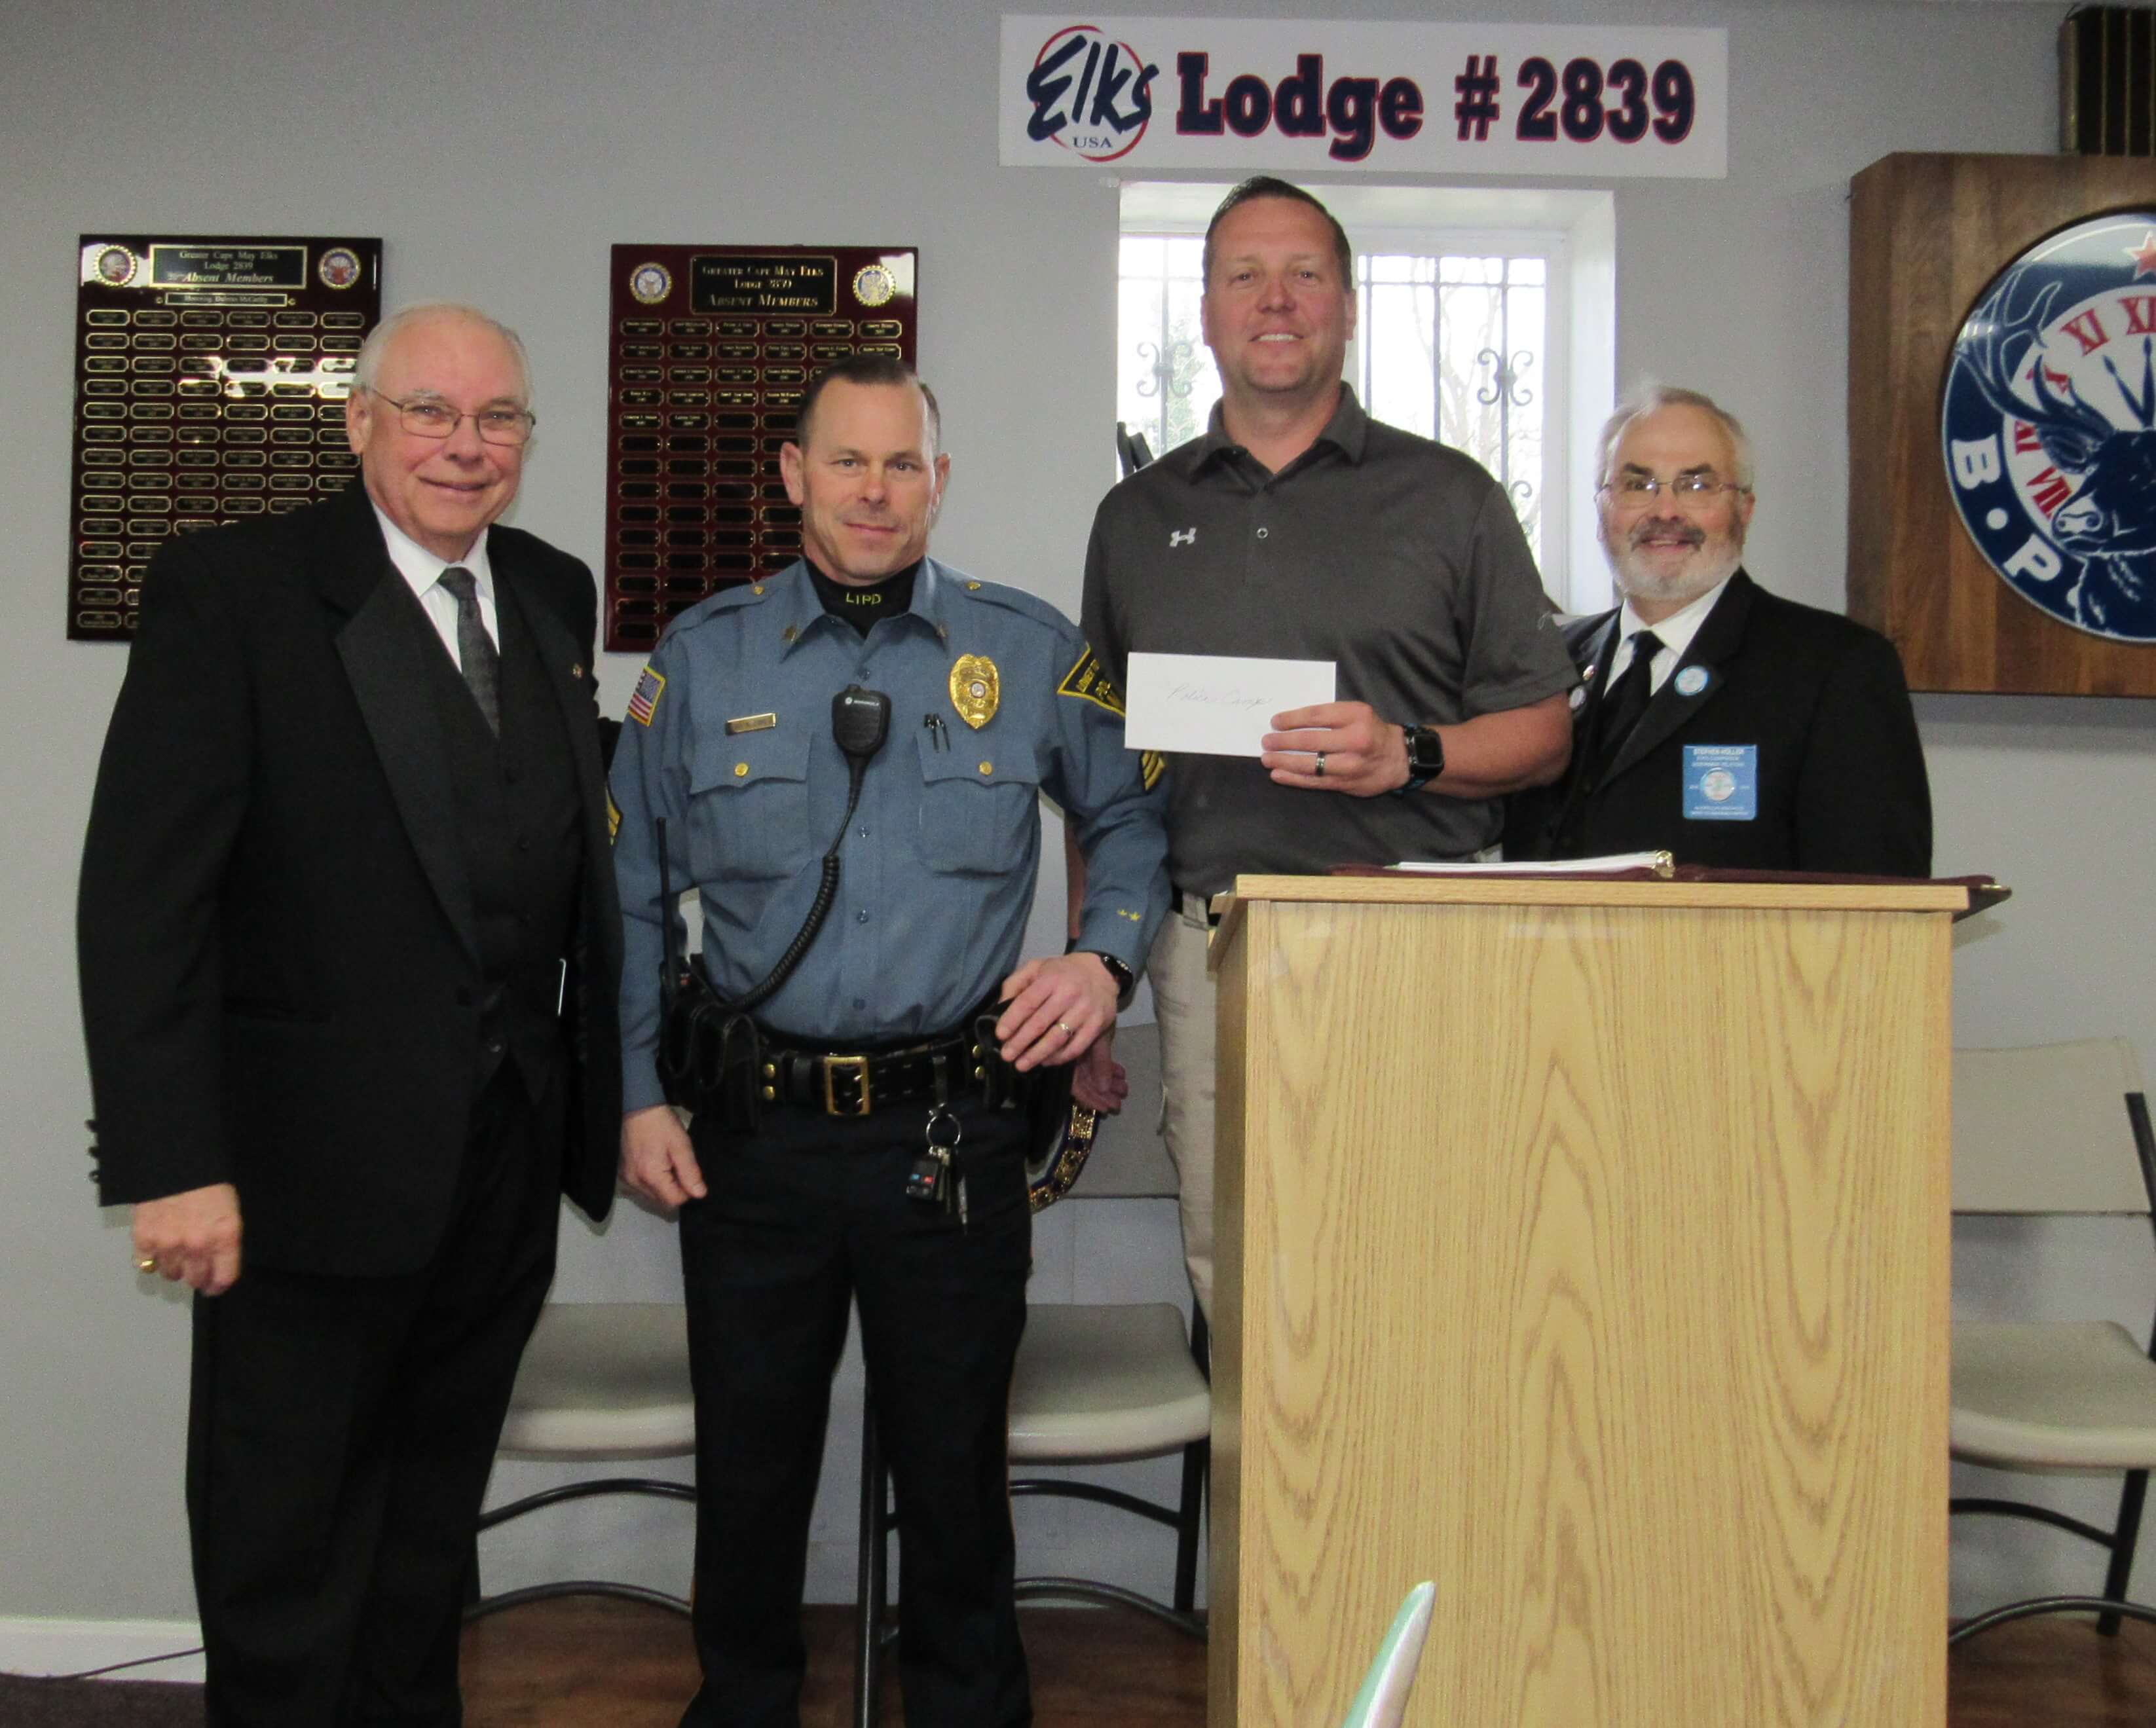 Steve Holler and ER Jerry Krause of the Greater Cape May Elks Lodge #2839 made a donation of $1